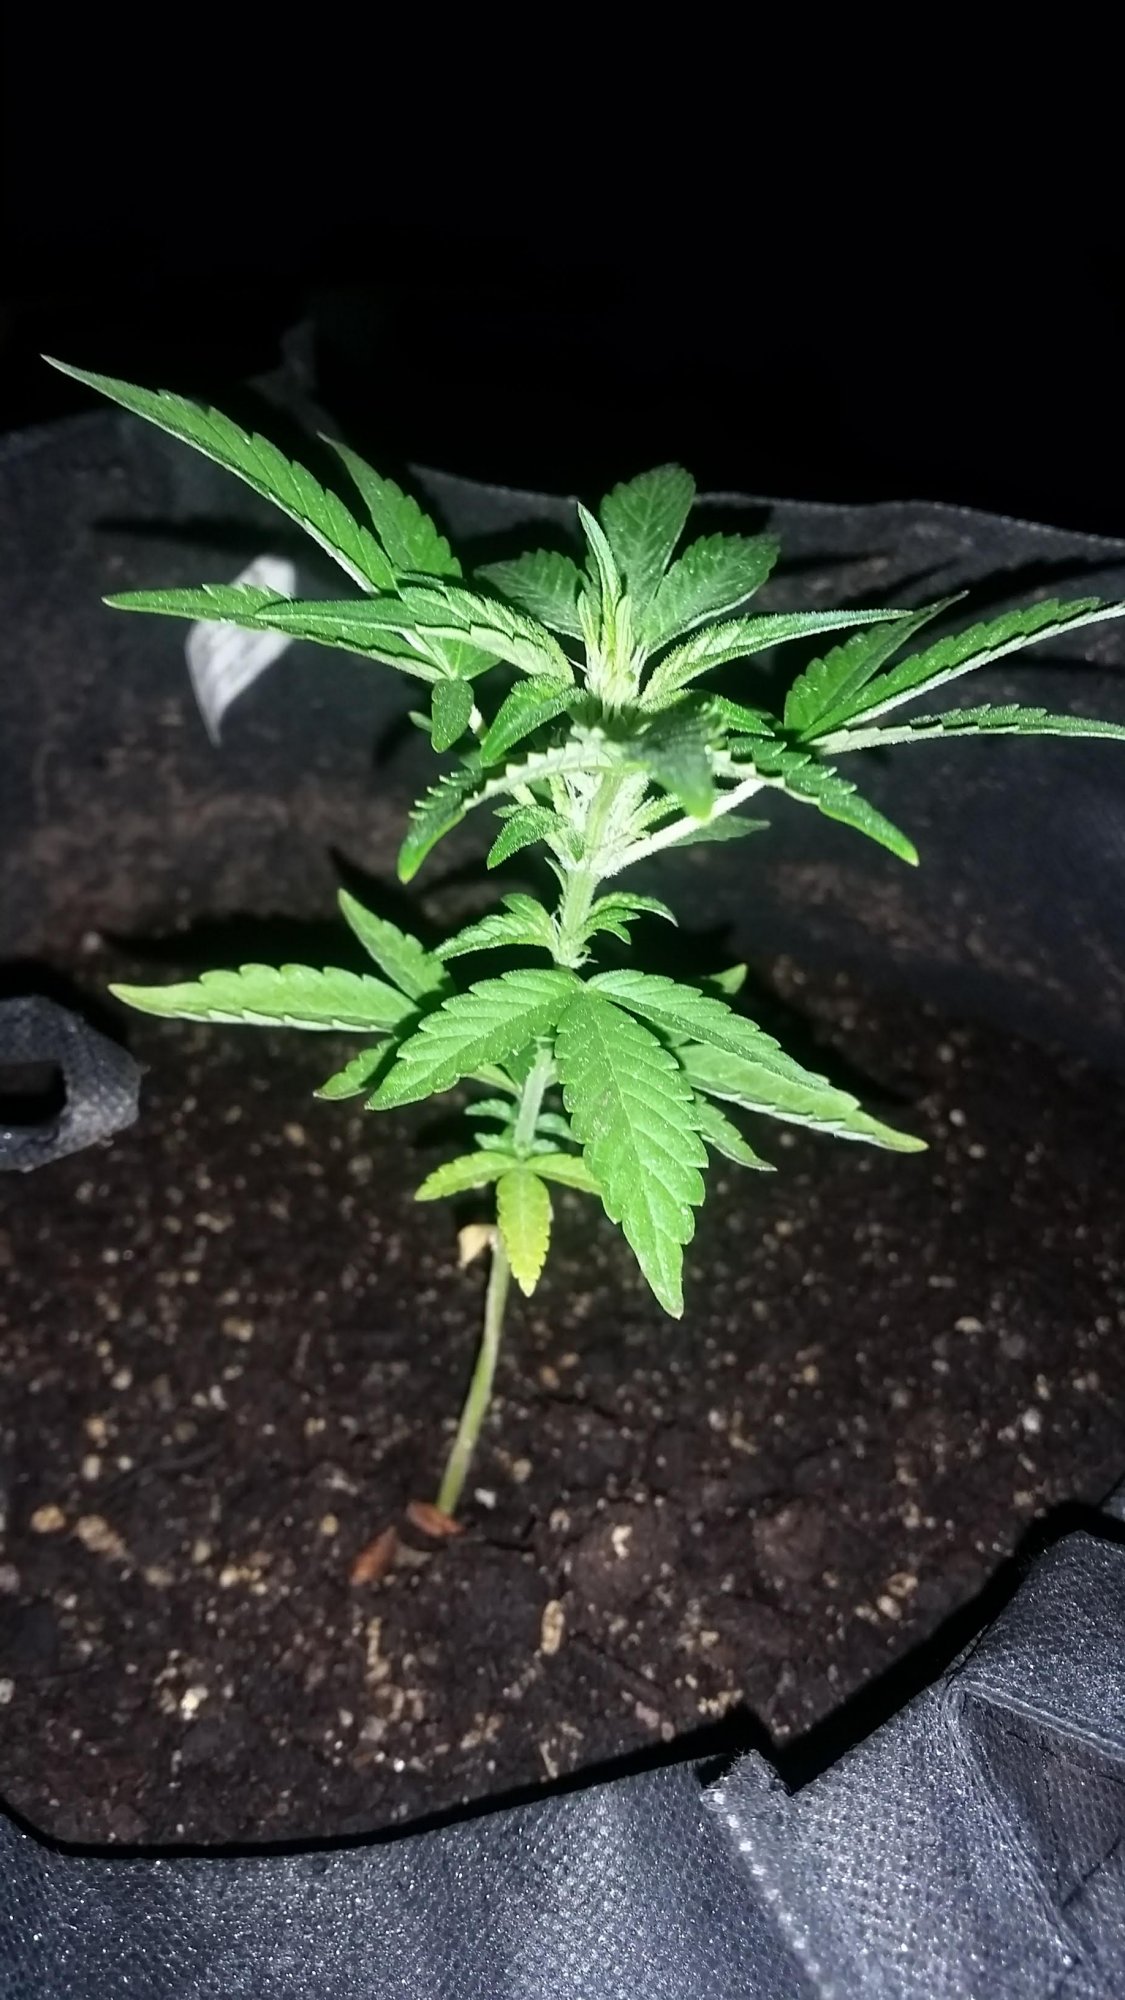 First time grower continual plant food supplementation advice required